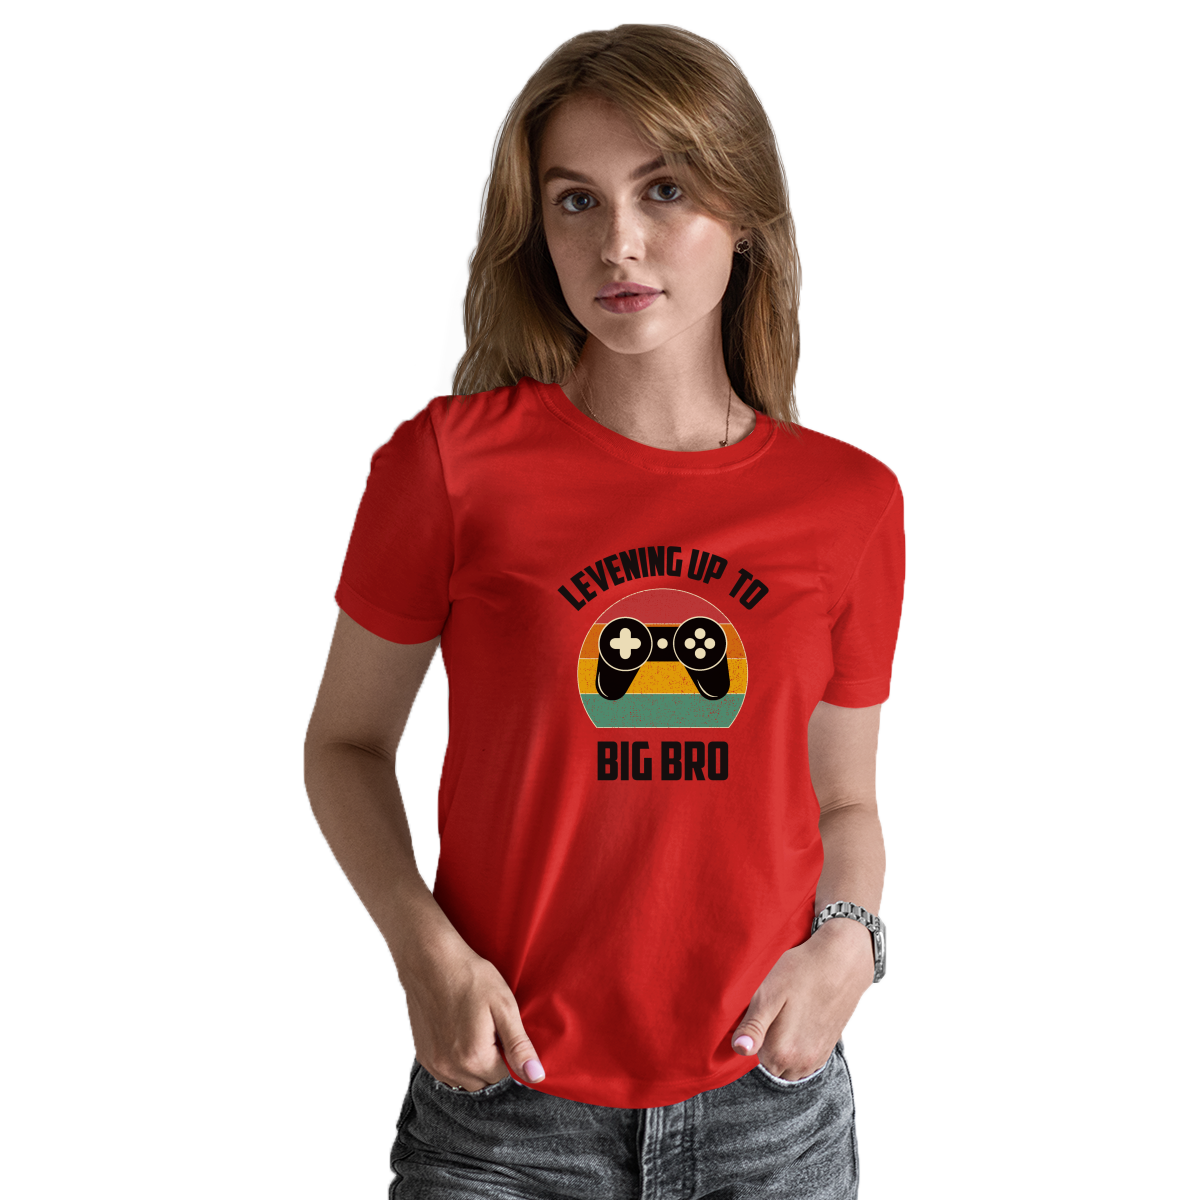 Leveling Up To Big Bro-2 Women's T-shirt | Red